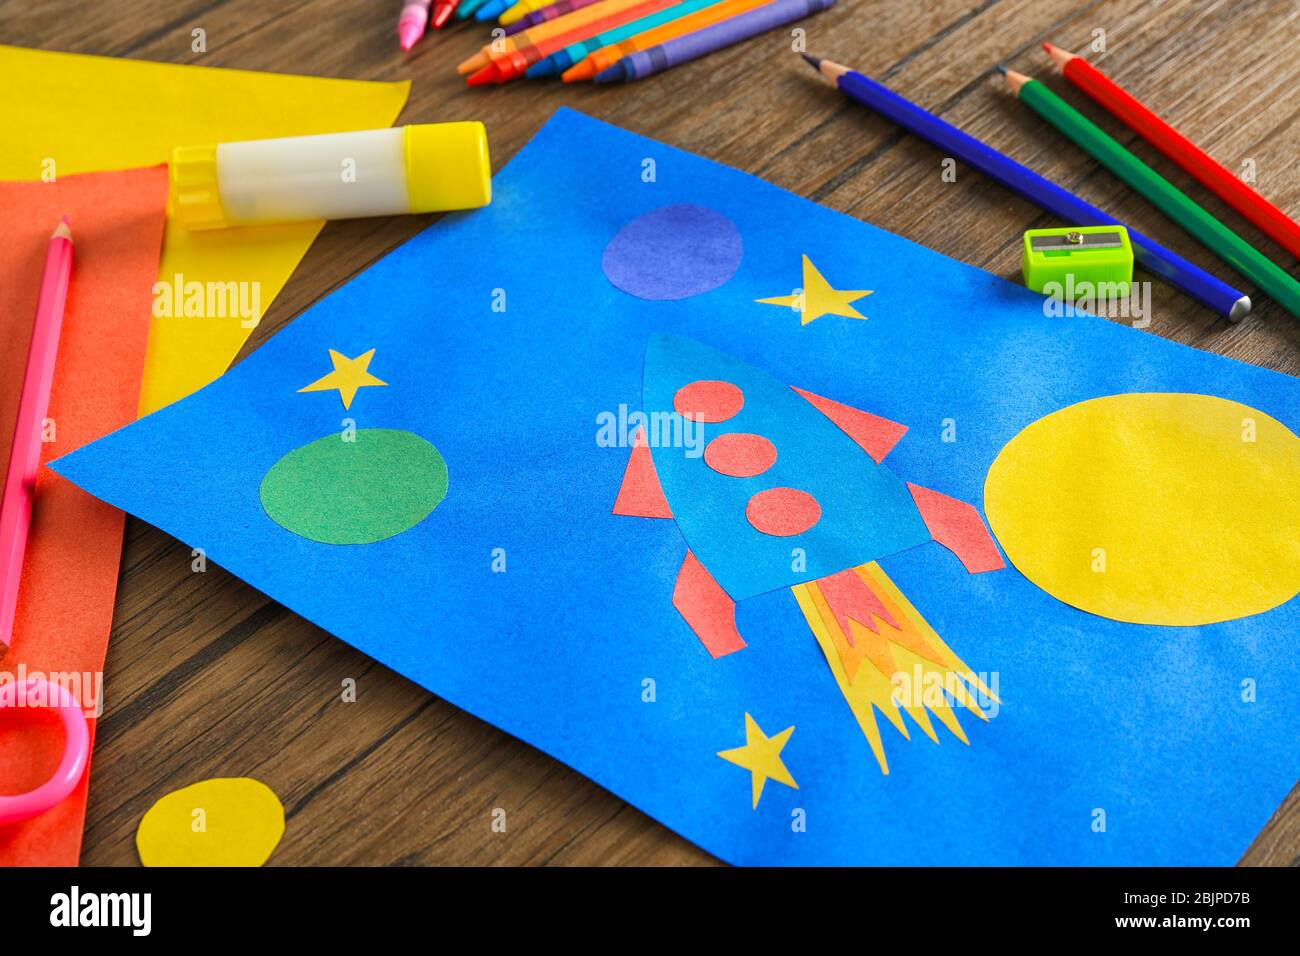 Child's applique of rocket on wooden table Stock Photo